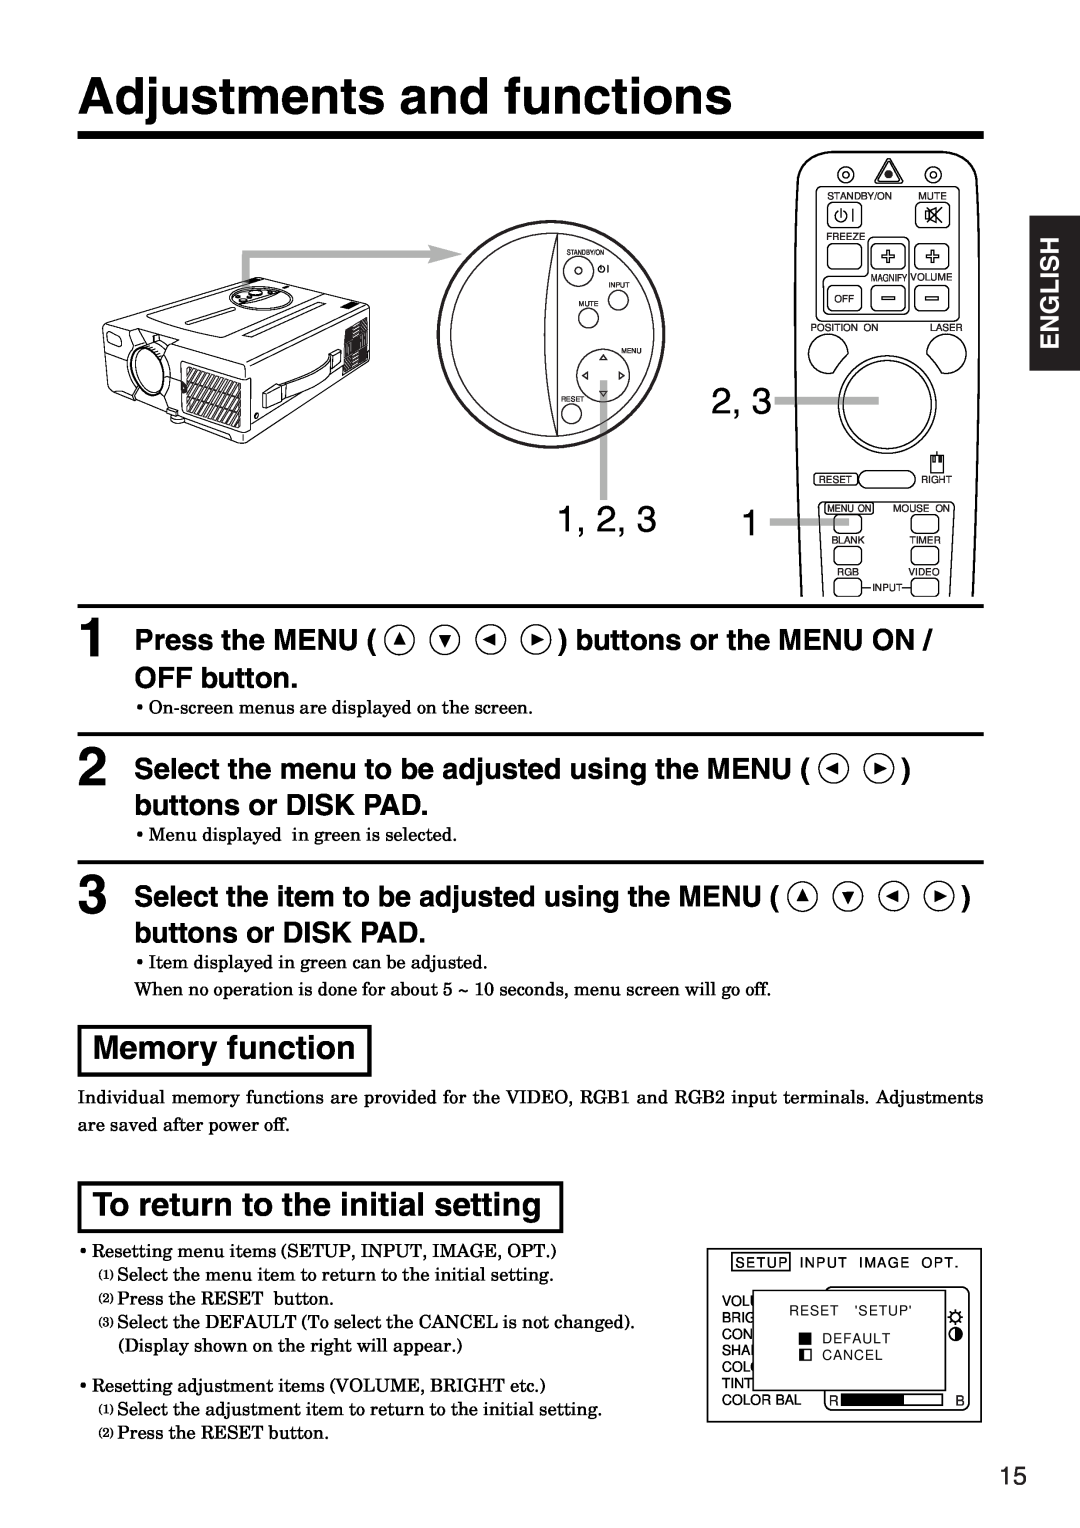 Hitachi CP-X935W Adjustments and functions, Memory function, To return to the initial setting, Press the MENU, OFF button 